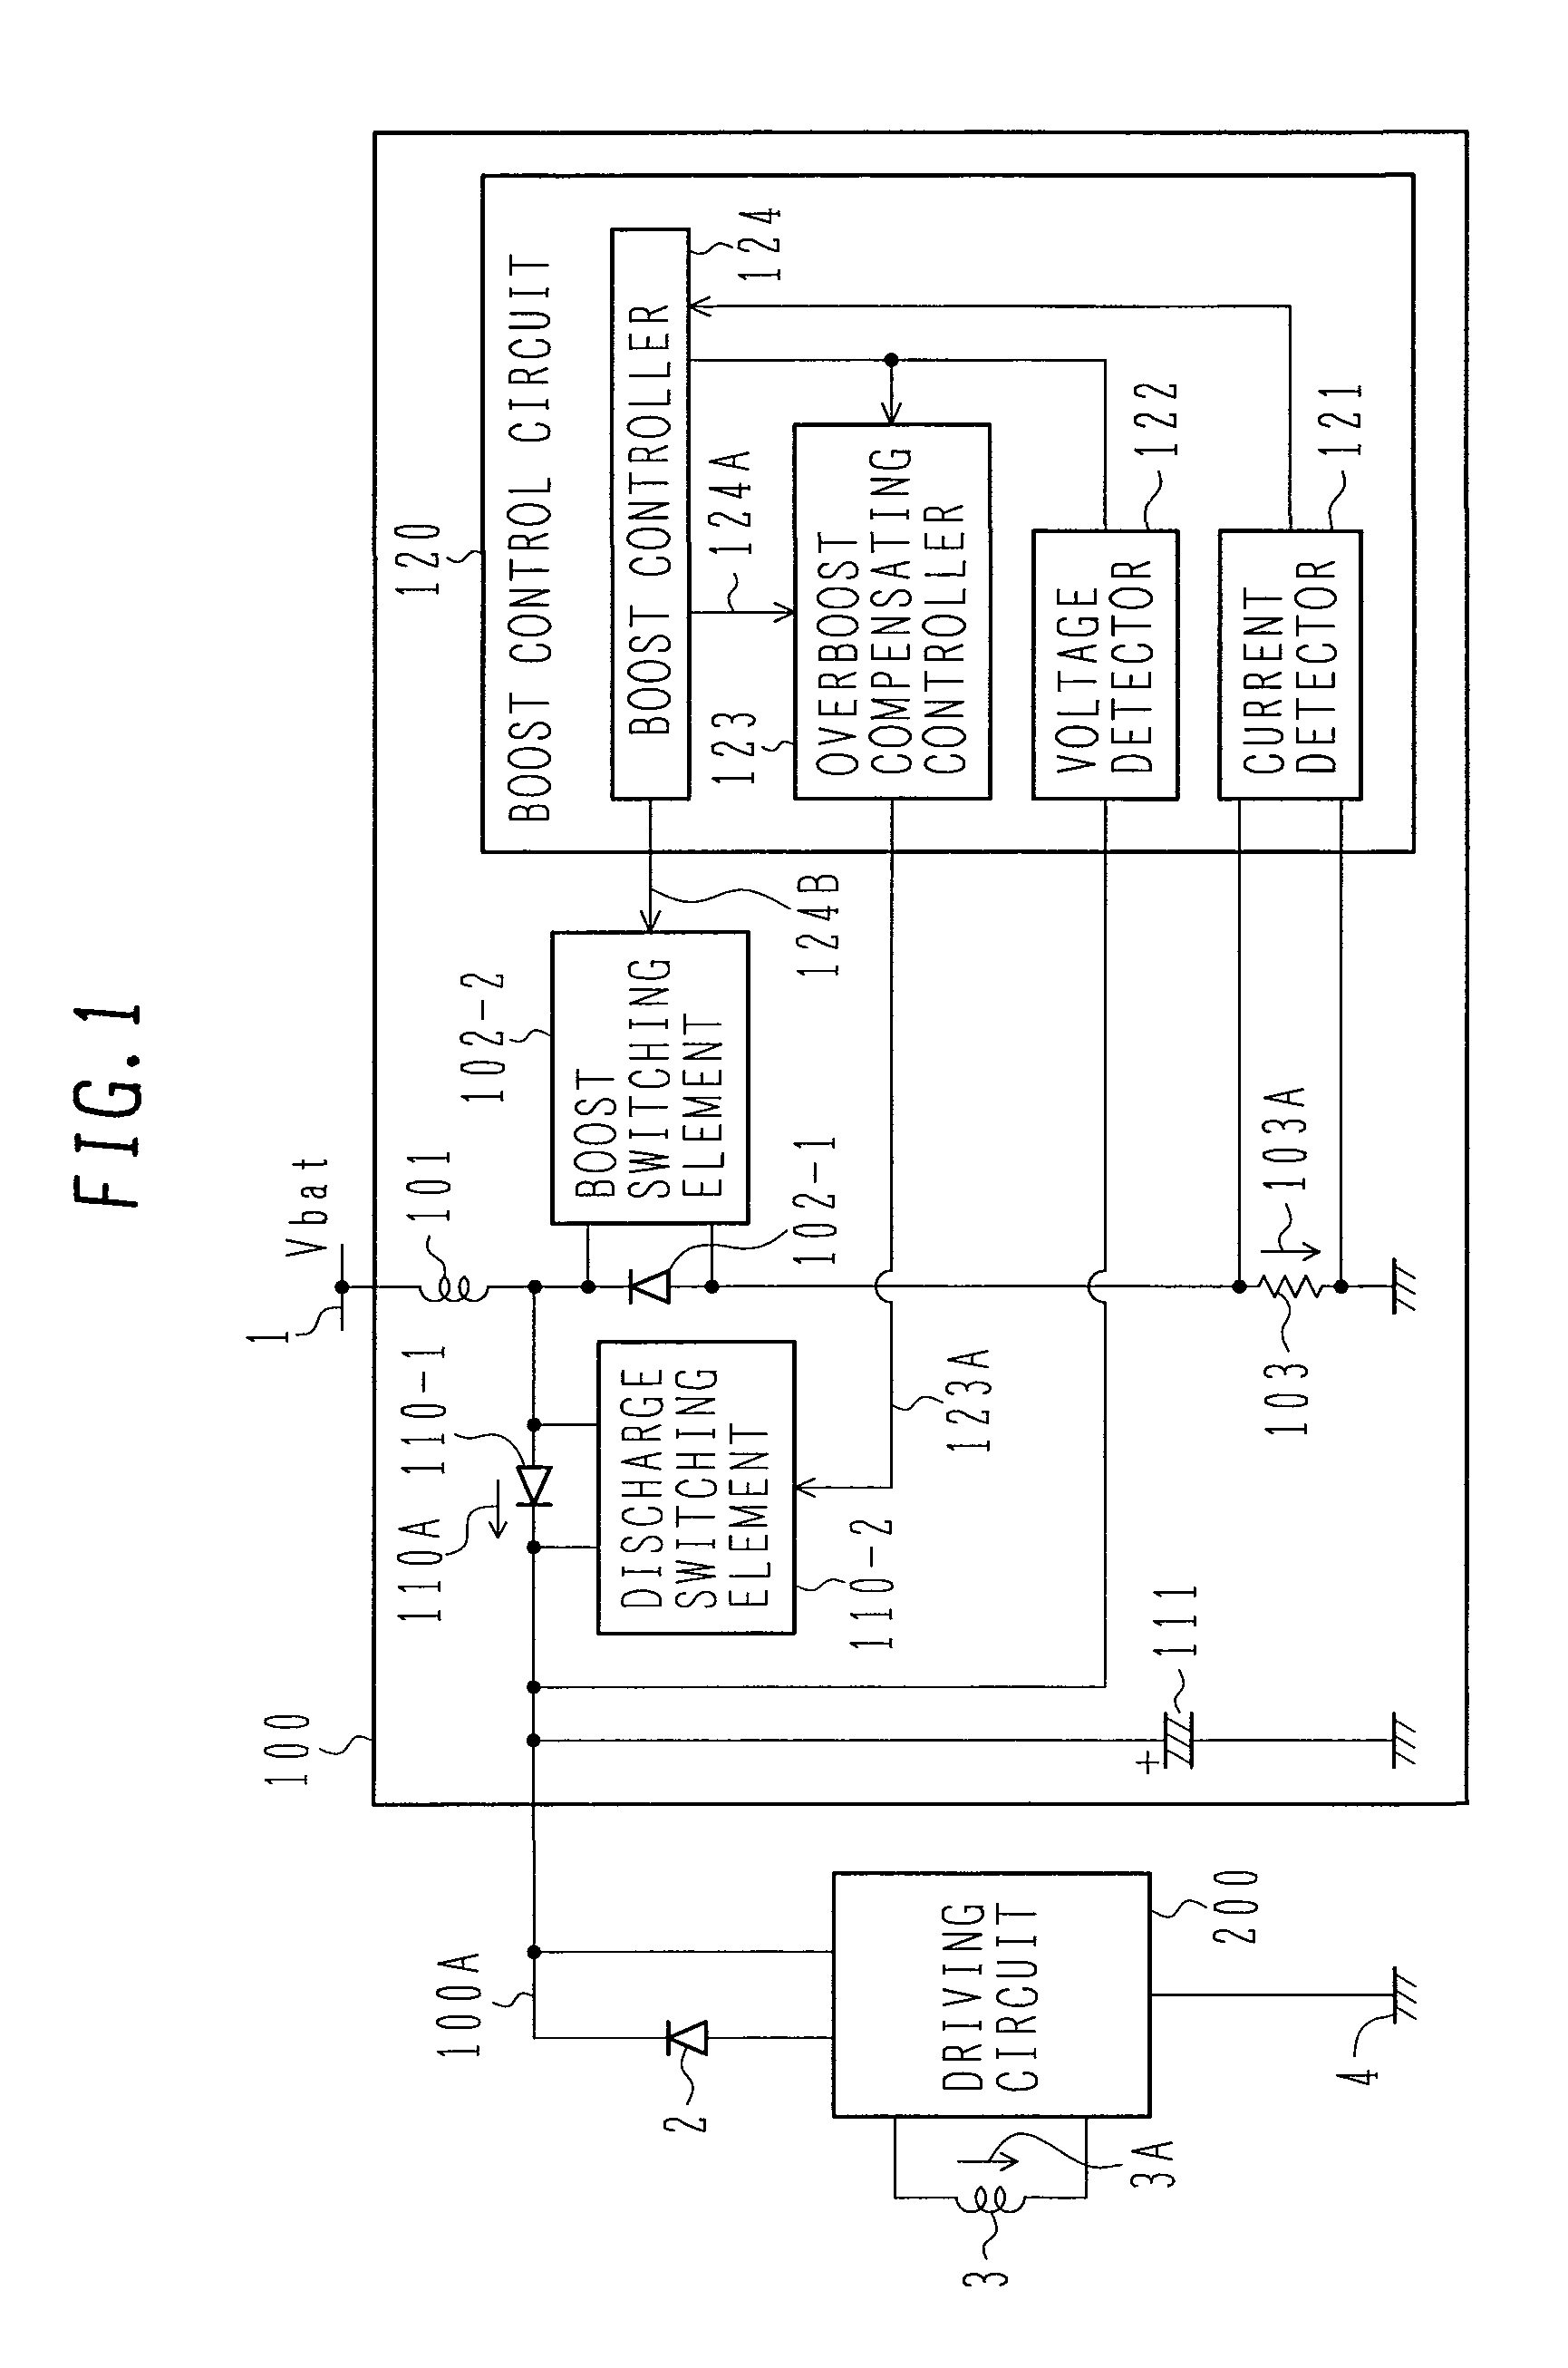 Internal combustion engine controller